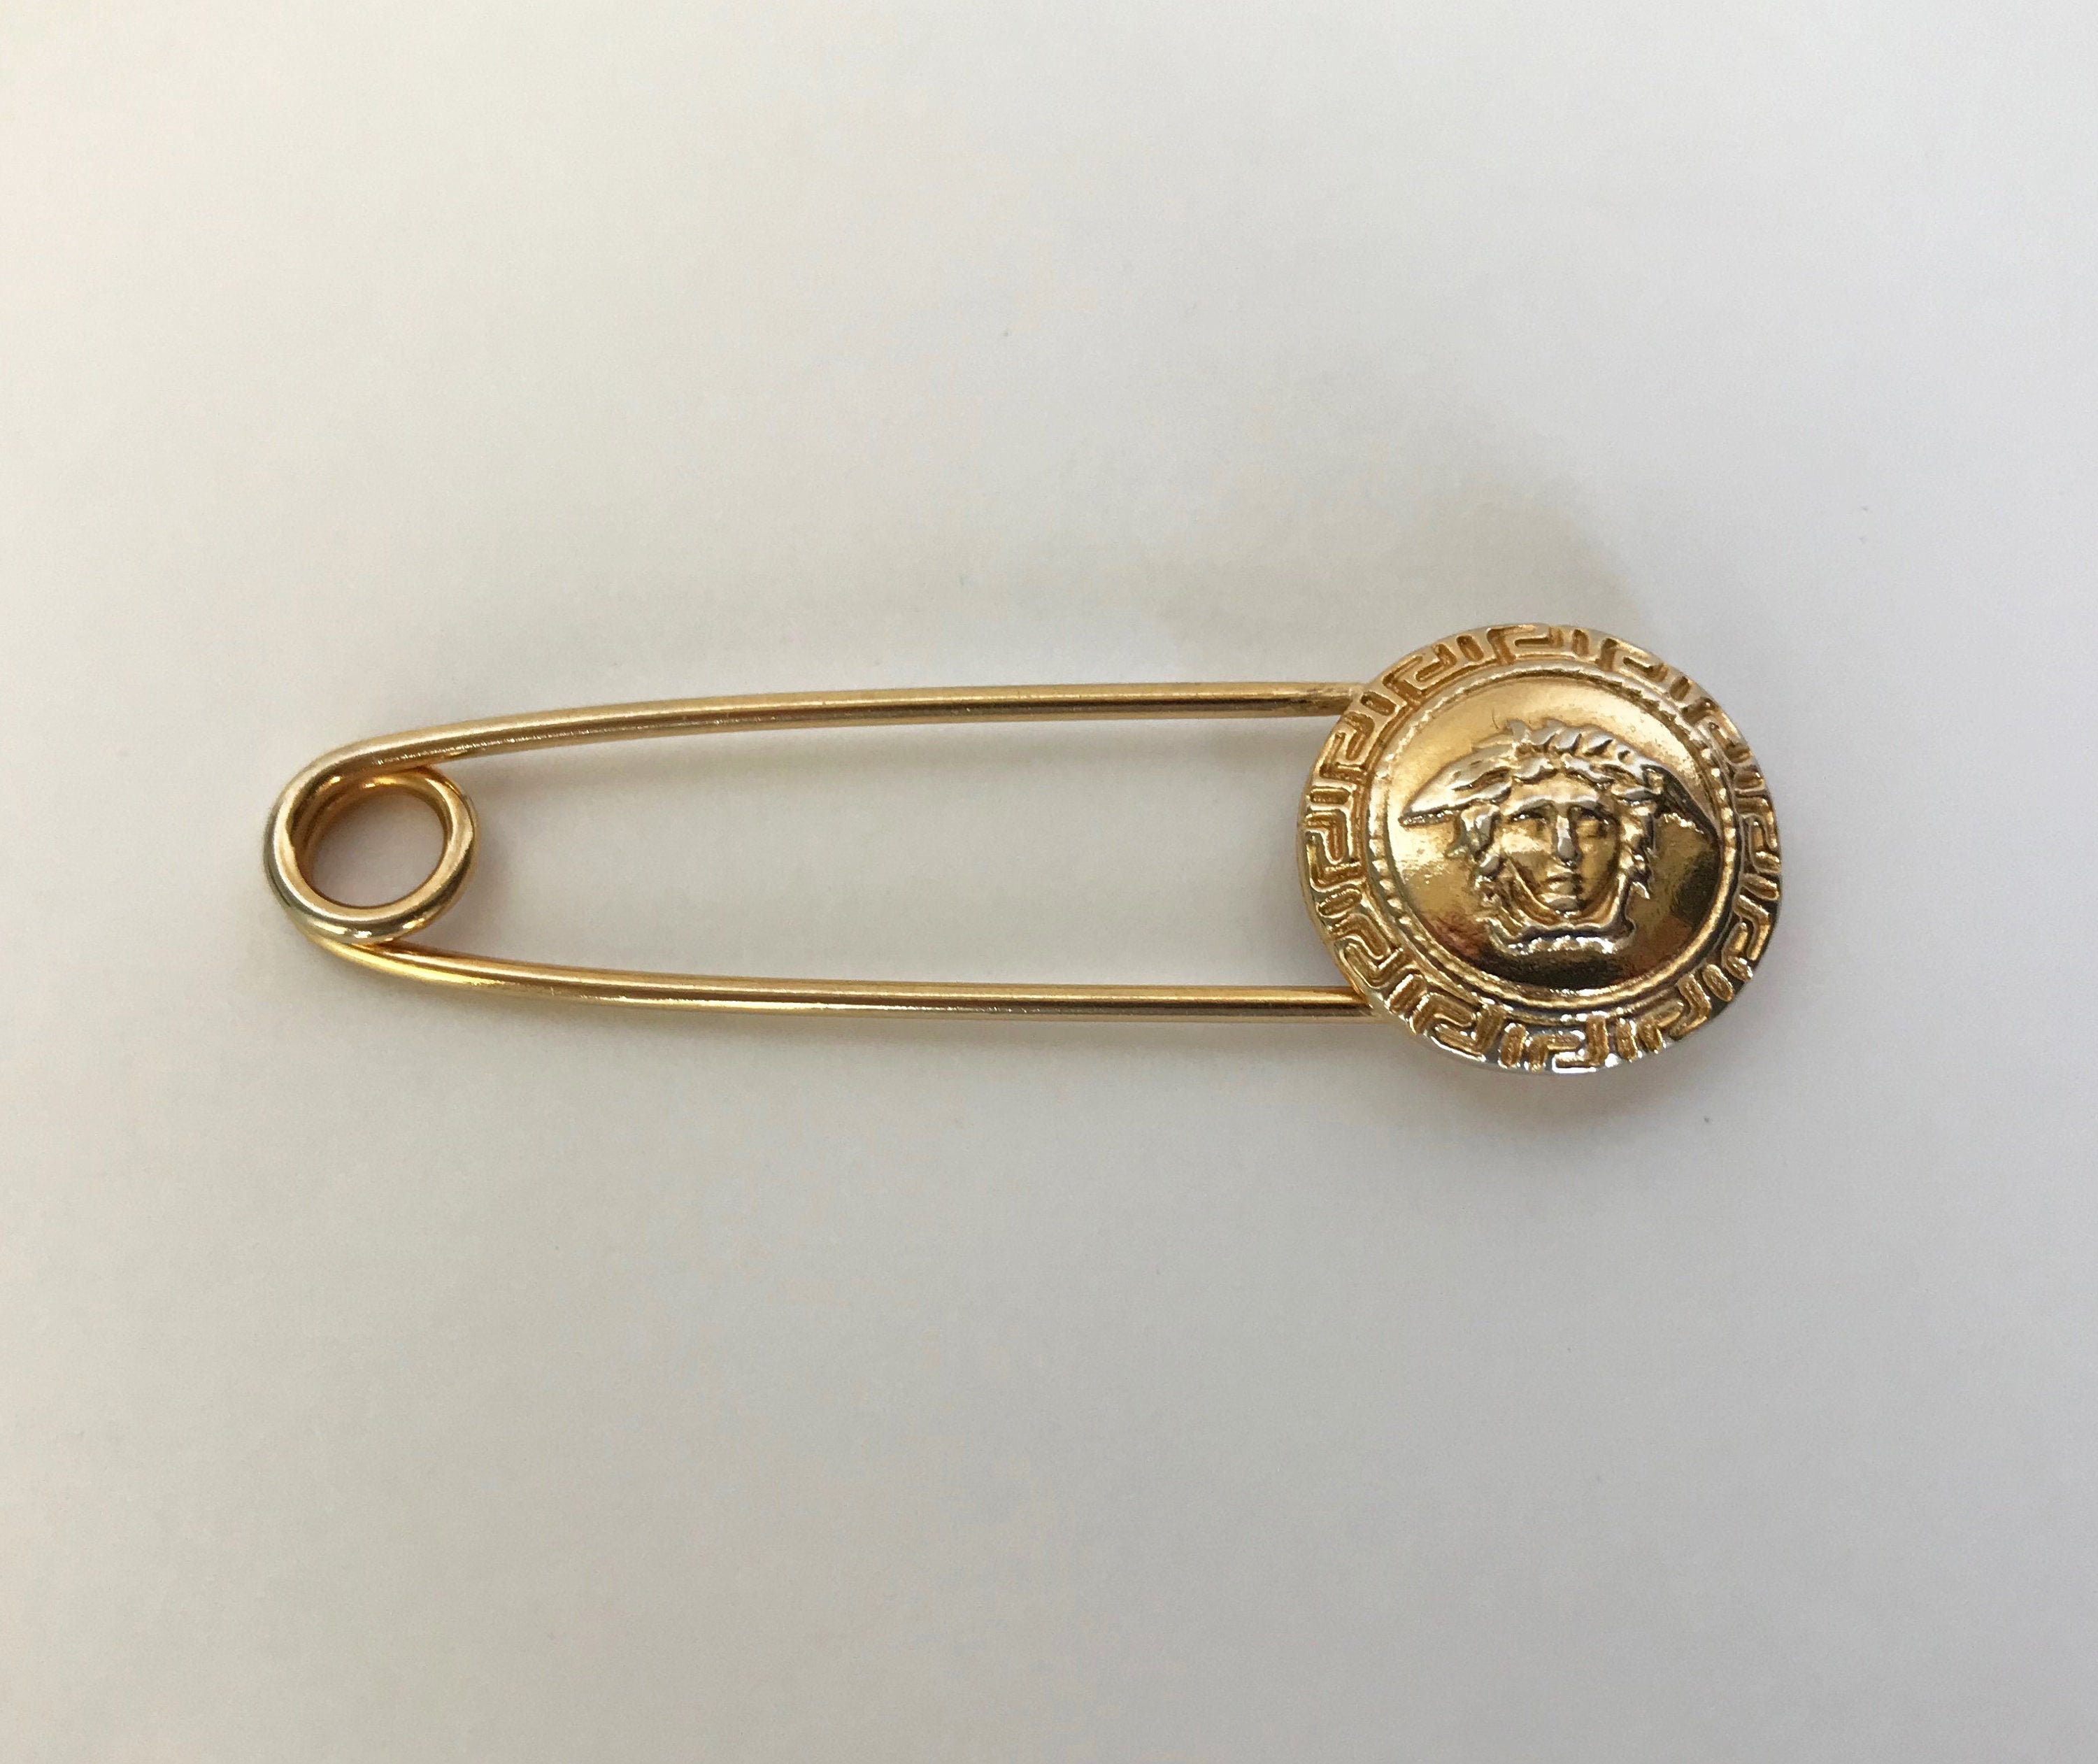 Vintage GIANNI VERSACE Medusa Head Pin at Rice and Beans Vintage